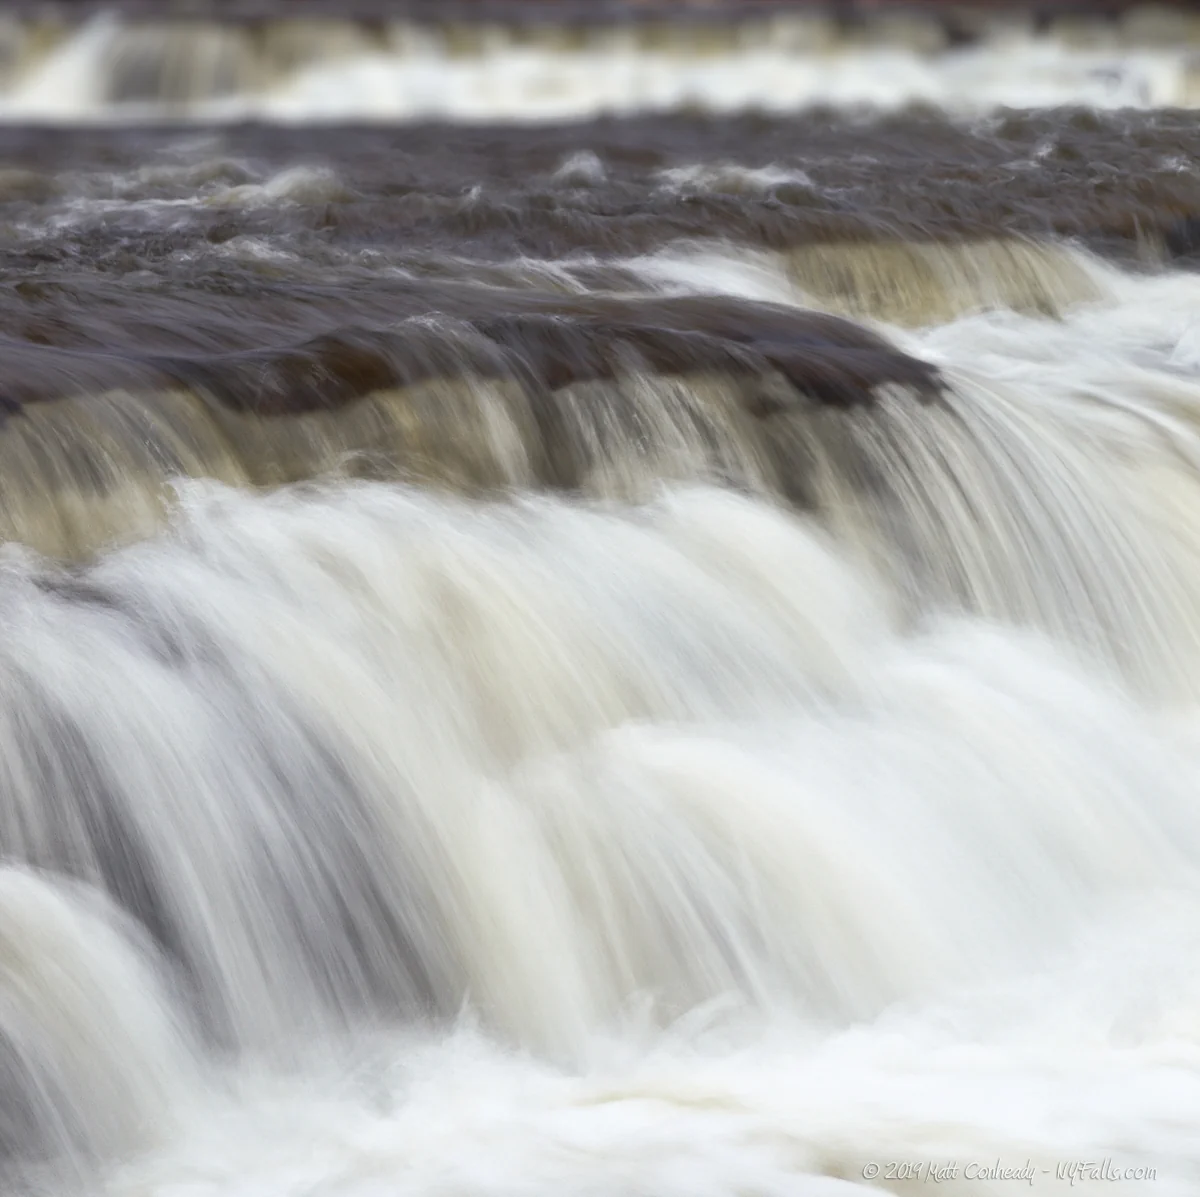 A closeup of Double Drop Falls on Flint Creek in Phelps, NY